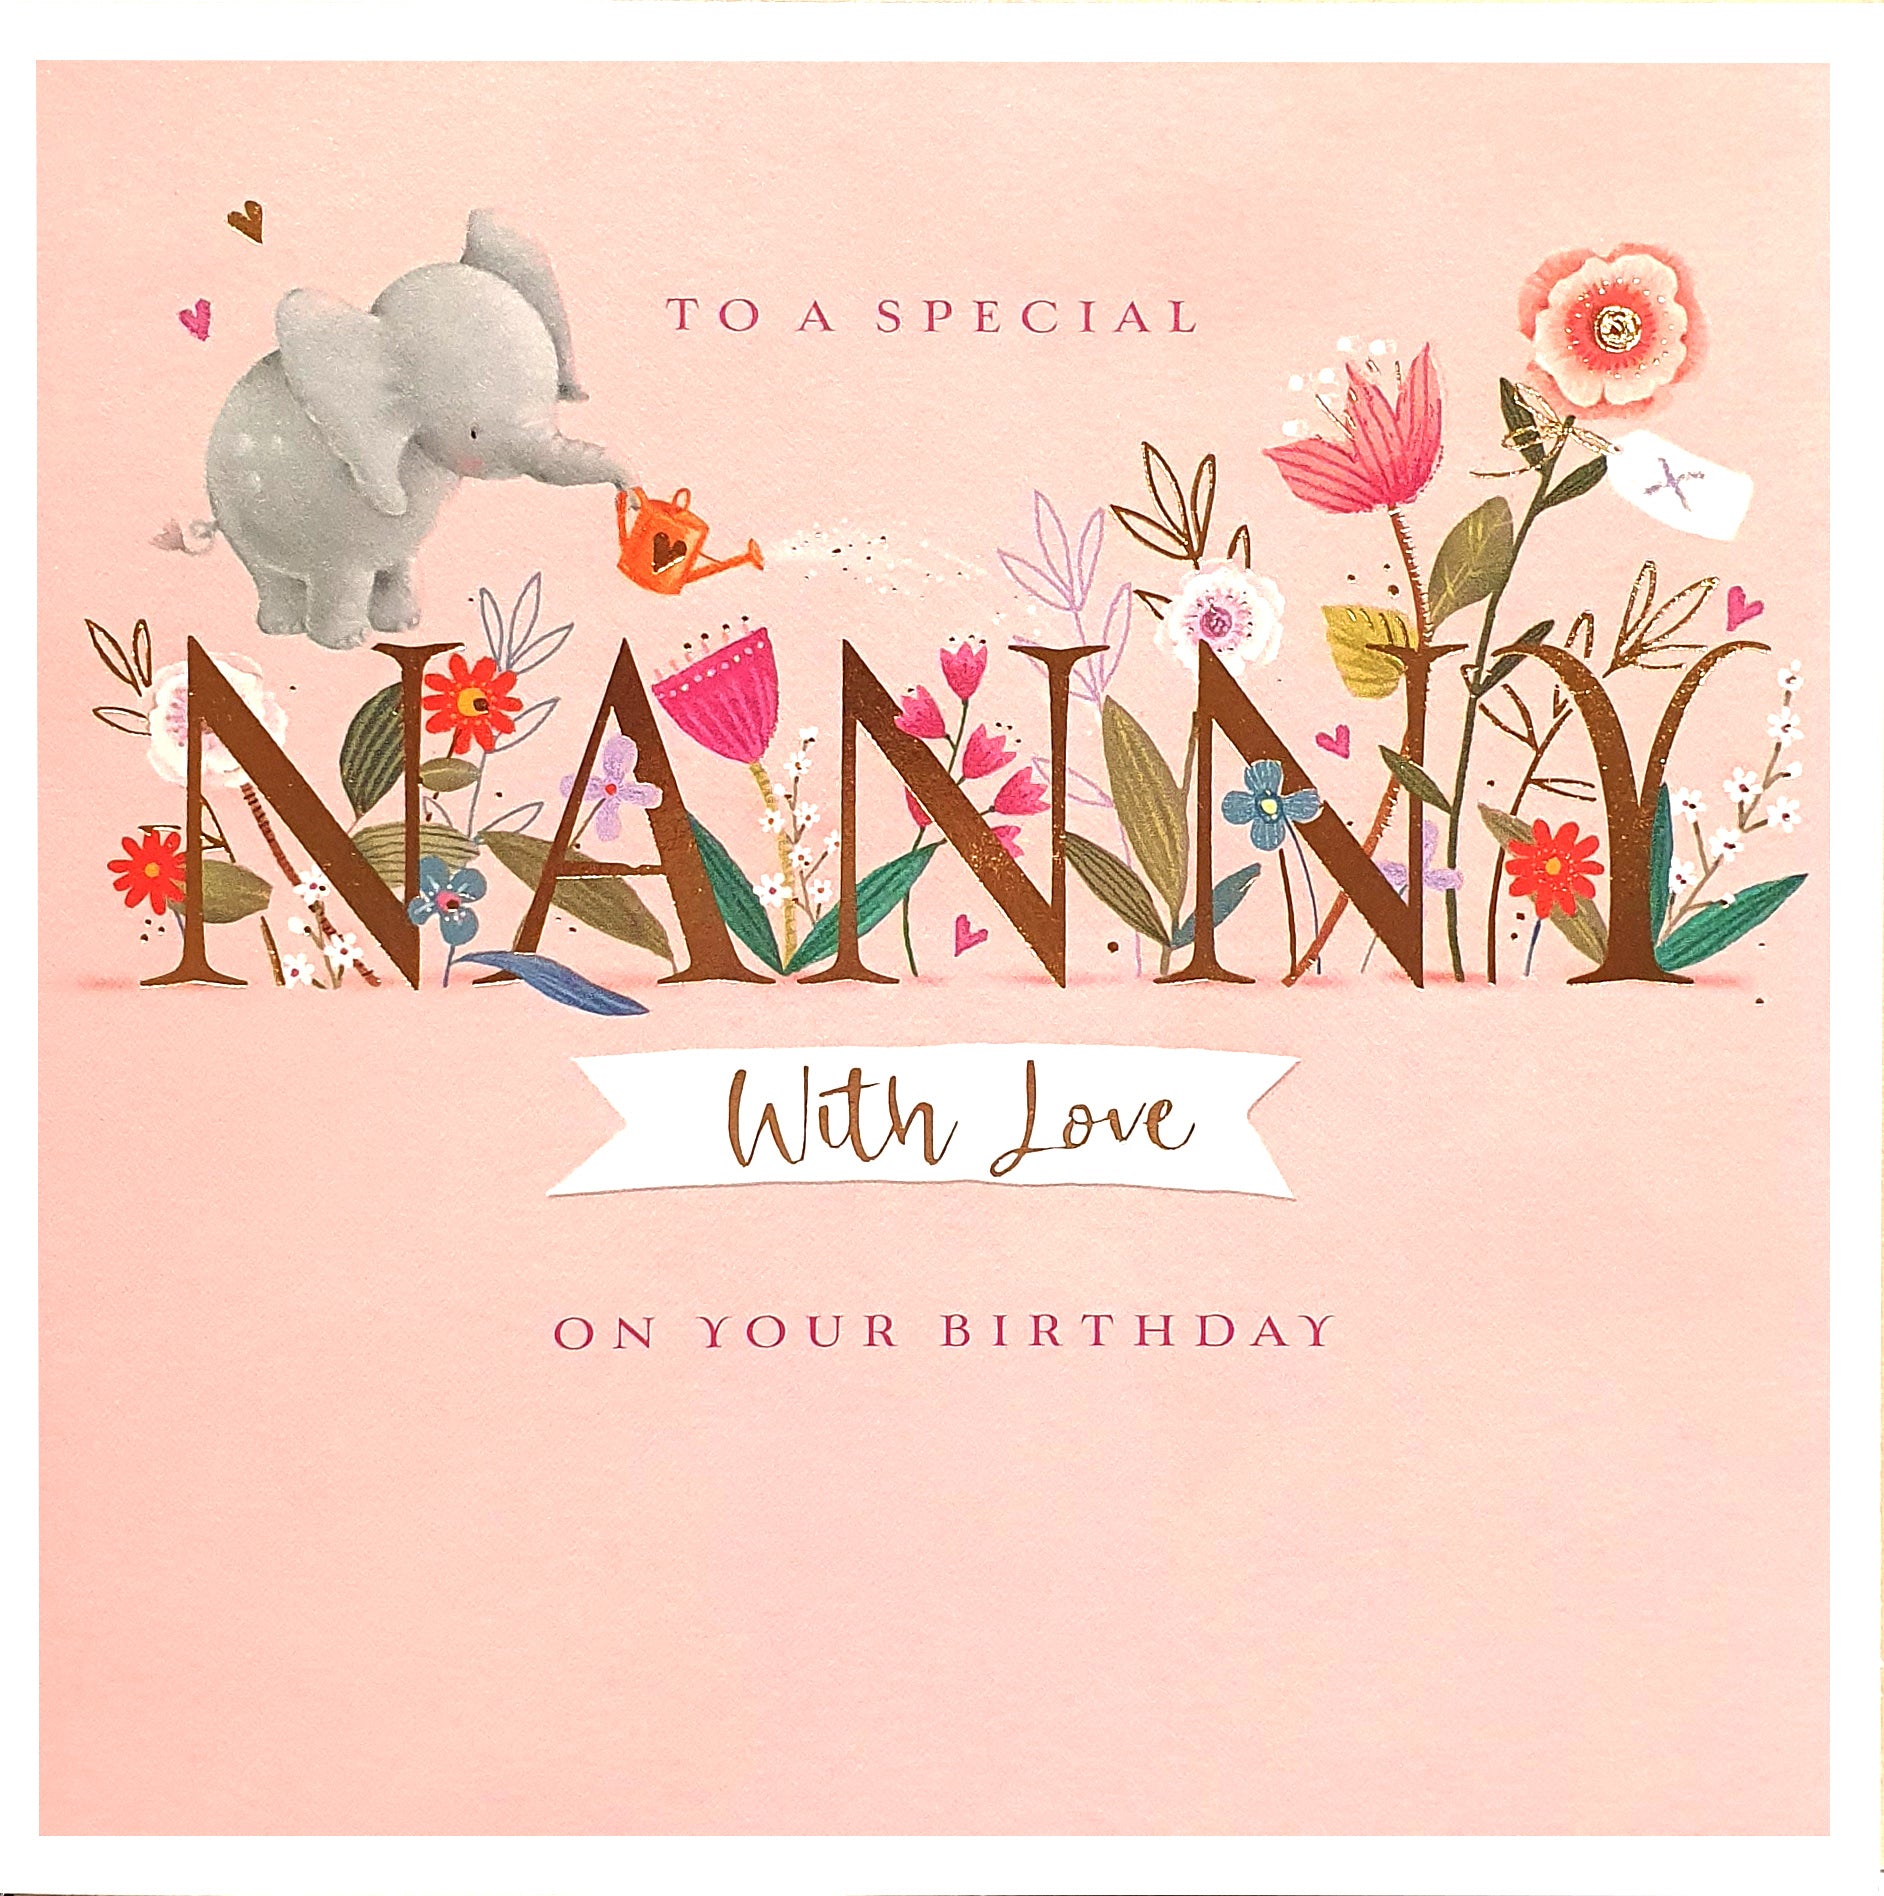 To A Special Nanny Birthday Card - Beautiful Bllooms